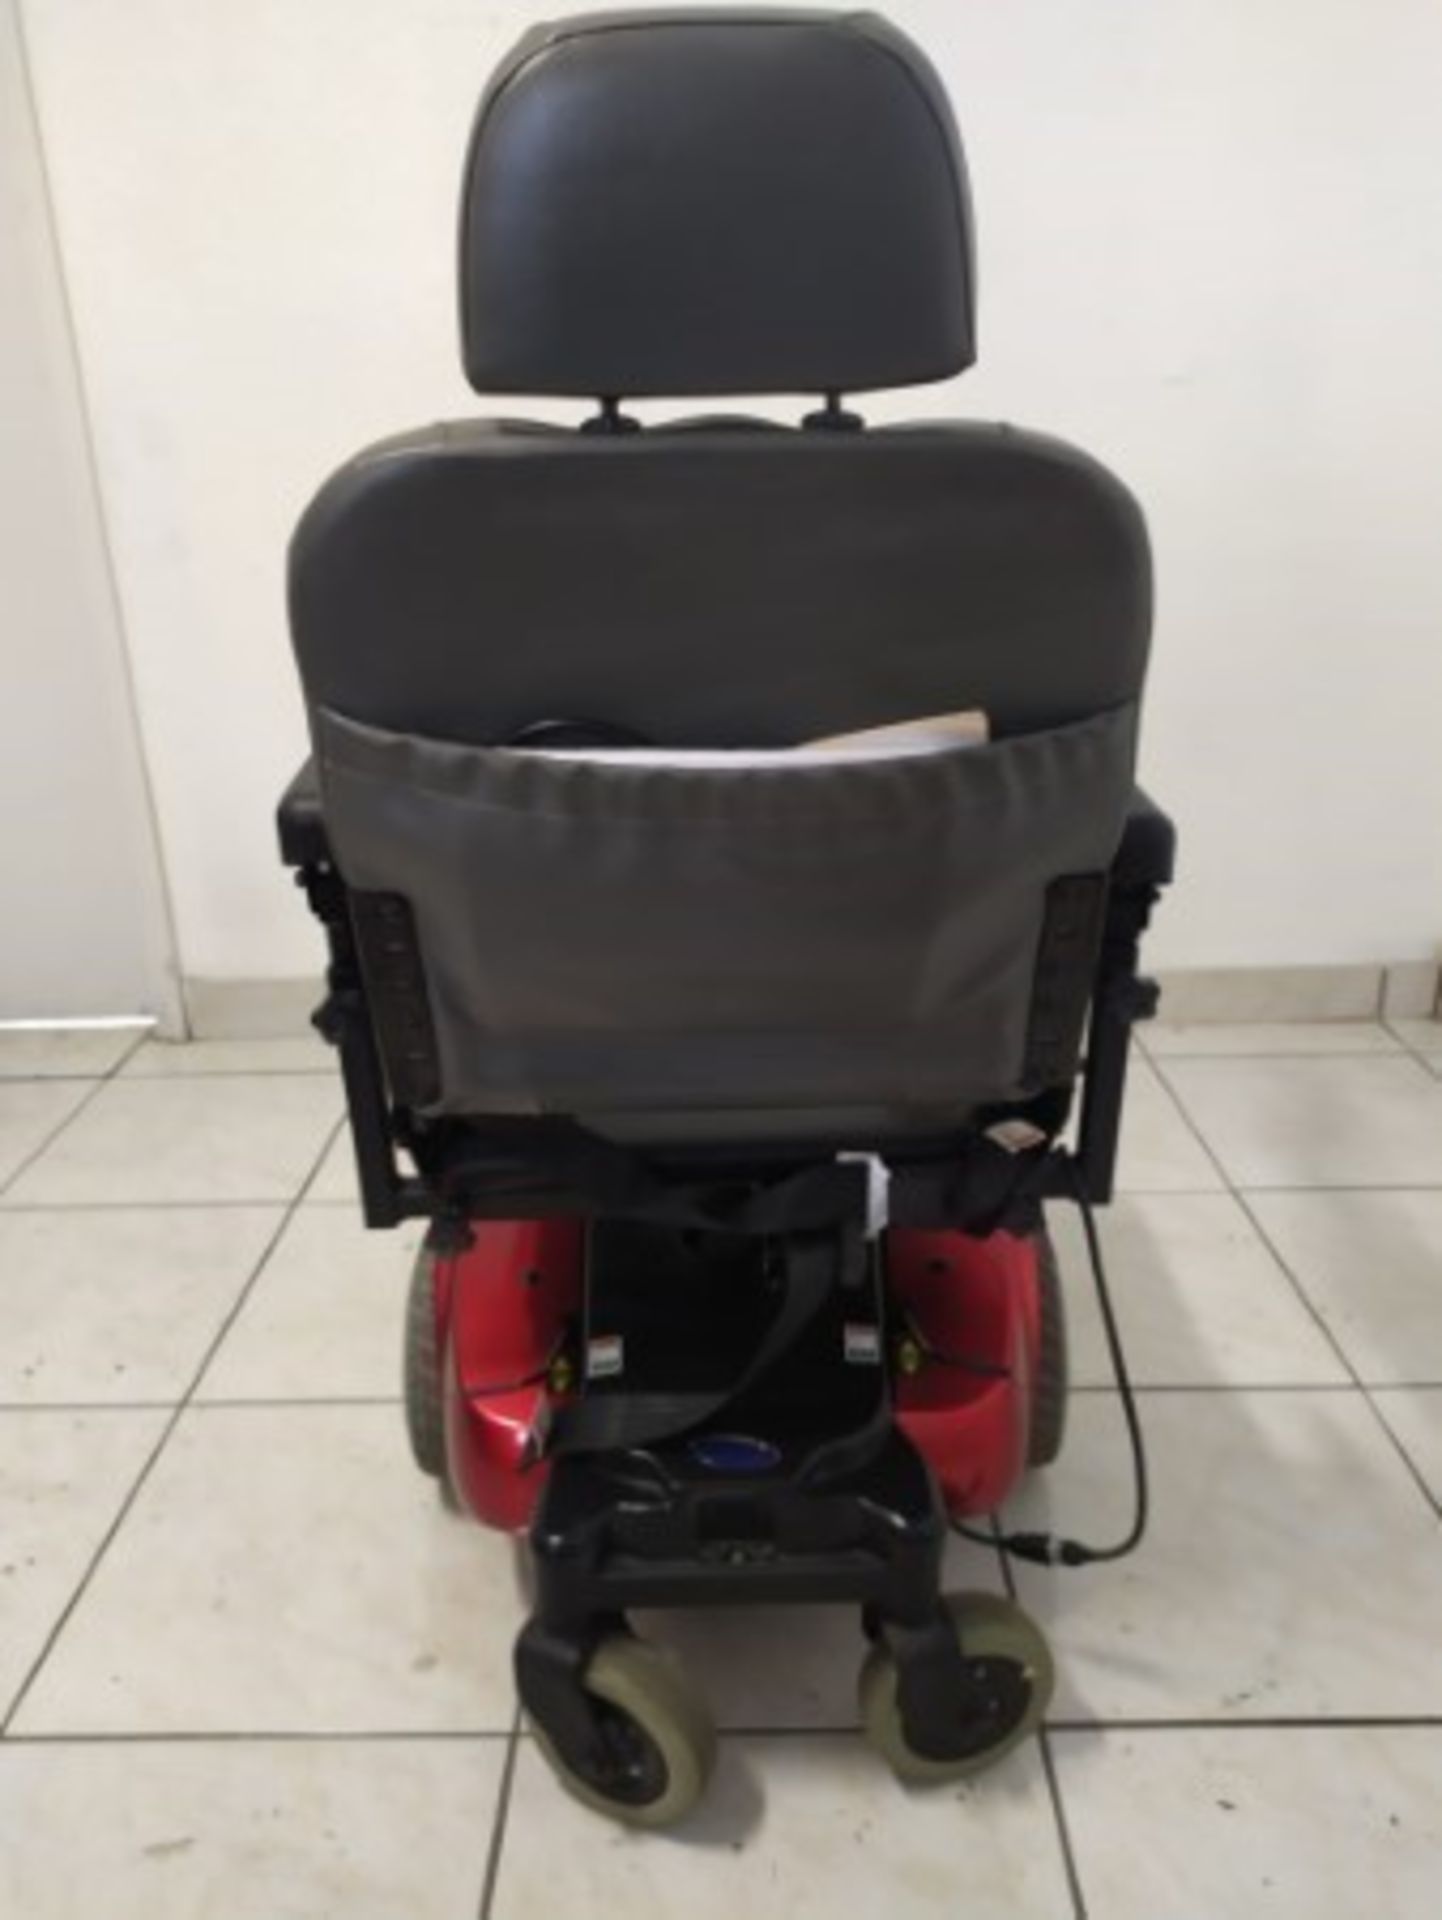 2007 INVACARE PRONTO M51PRB 6-WHEEL POWER CHAIR WITH BUILT-IN CHARGER - RED - 300LB CAPACITY - SERIA - Image 3 of 4